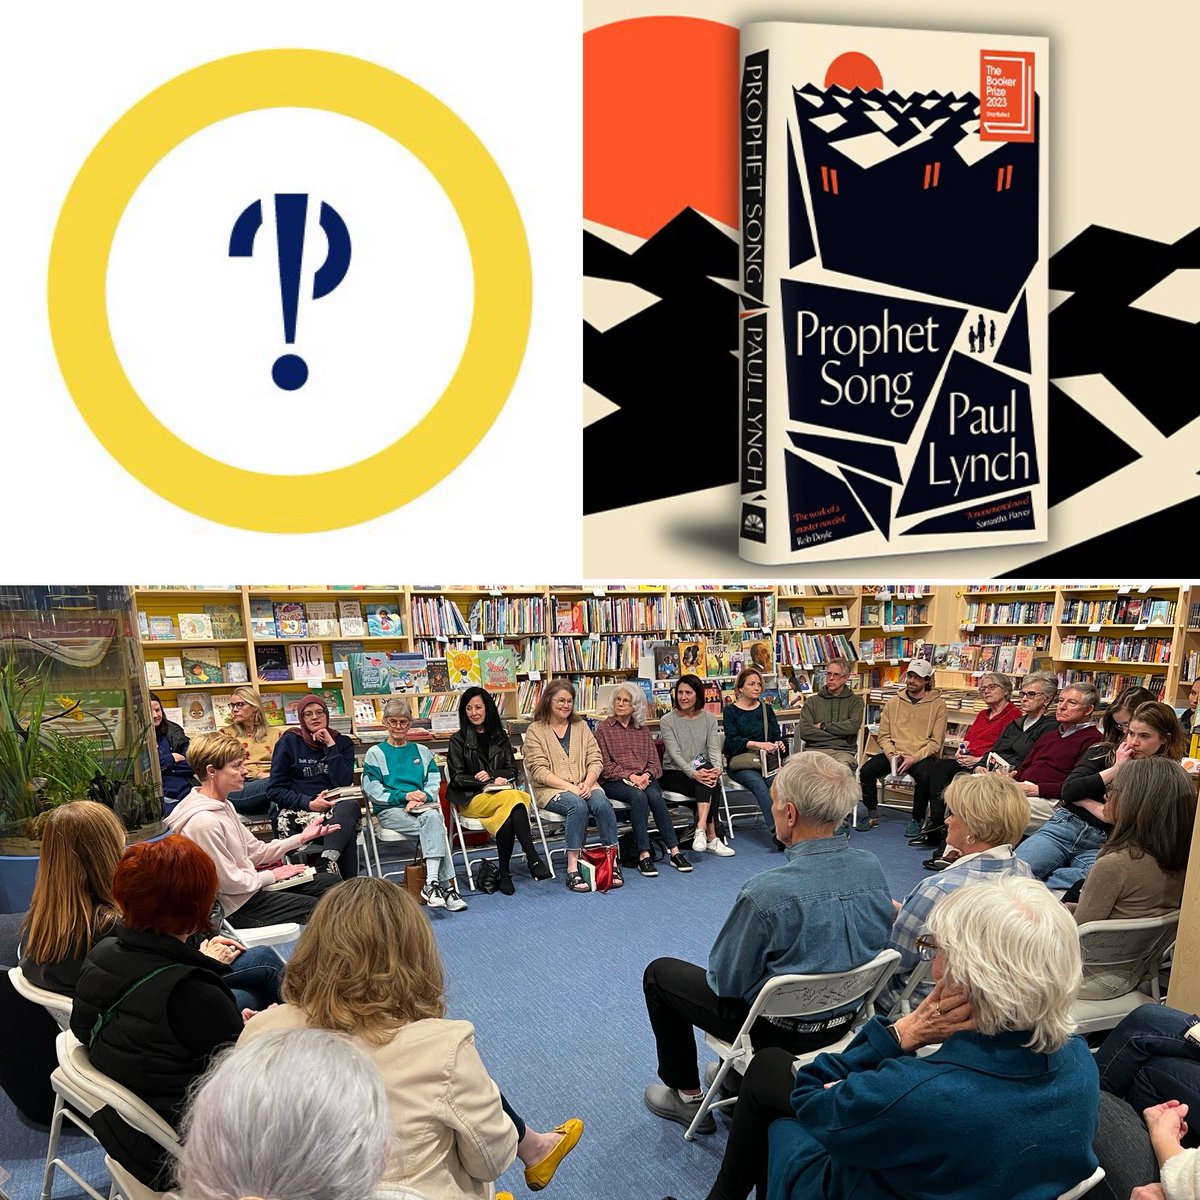 📚🎉 Packed house at @Interabang Books with @LoriFeathers for our lively discussion of Booker Prize winner @paullynchwriter's 'Prophet Song' at Book Club today! 📖 Join us next time for more literary exploration and community connections! #BookClub #ProphetSong #InterabangBooks